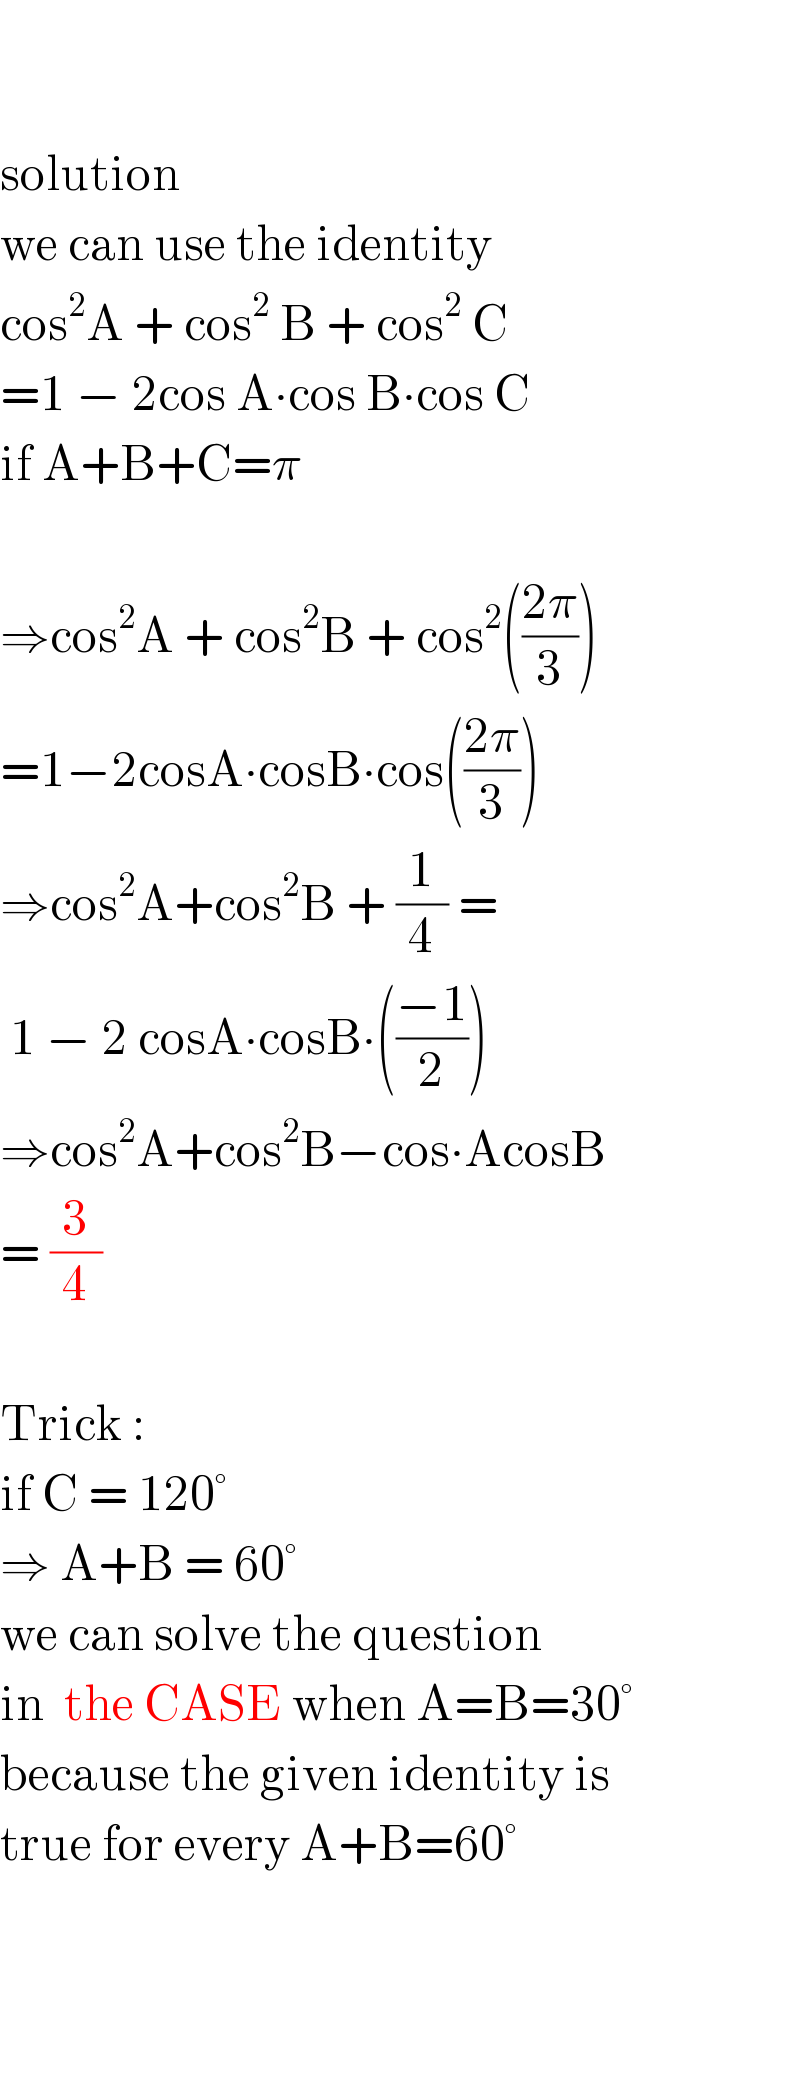     solution  we can use the identity  cos^2 A + cos^2  B + cos^2  C  =1 − 2cos A∙cos B∙cos C  if A+B+C=π    ⇒cos^2 A + cos^2 B + cos^2 (((2π)/3))  =1−2cosA∙cosB∙cos(((2π)/3))  ⇒cos^2 A+cos^2 B + (1/4) =   1 − 2 cosA∙cosB∙(((−1)/2))  ⇒cos^2 A+cos^2 B−cos∙AcosB  = (3/4)    Trick :  if C = 120°  ⇒ A+B = 60°  we can solve the question  in  the CASE when A=B=30°  because the given identity is  true for every A+B=60°        